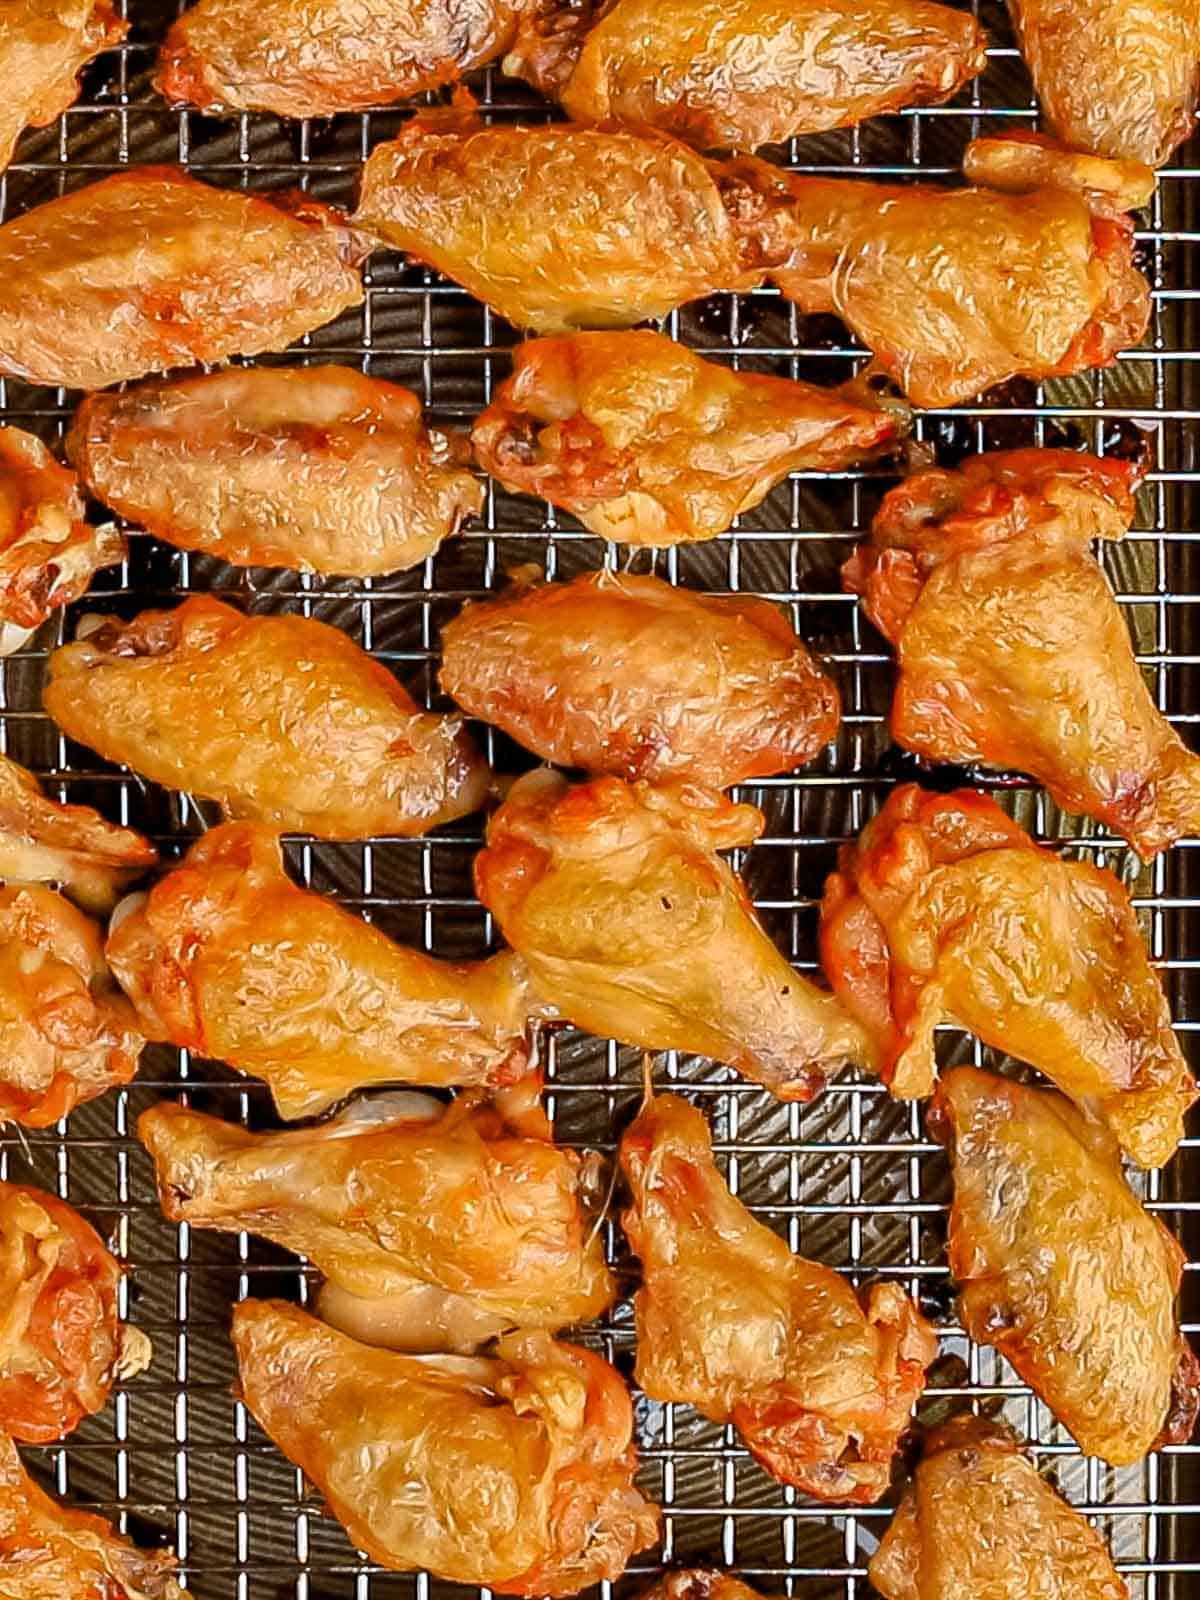 Crispy baked chicken wings with golden brown crispy skin on top of a wire rack.